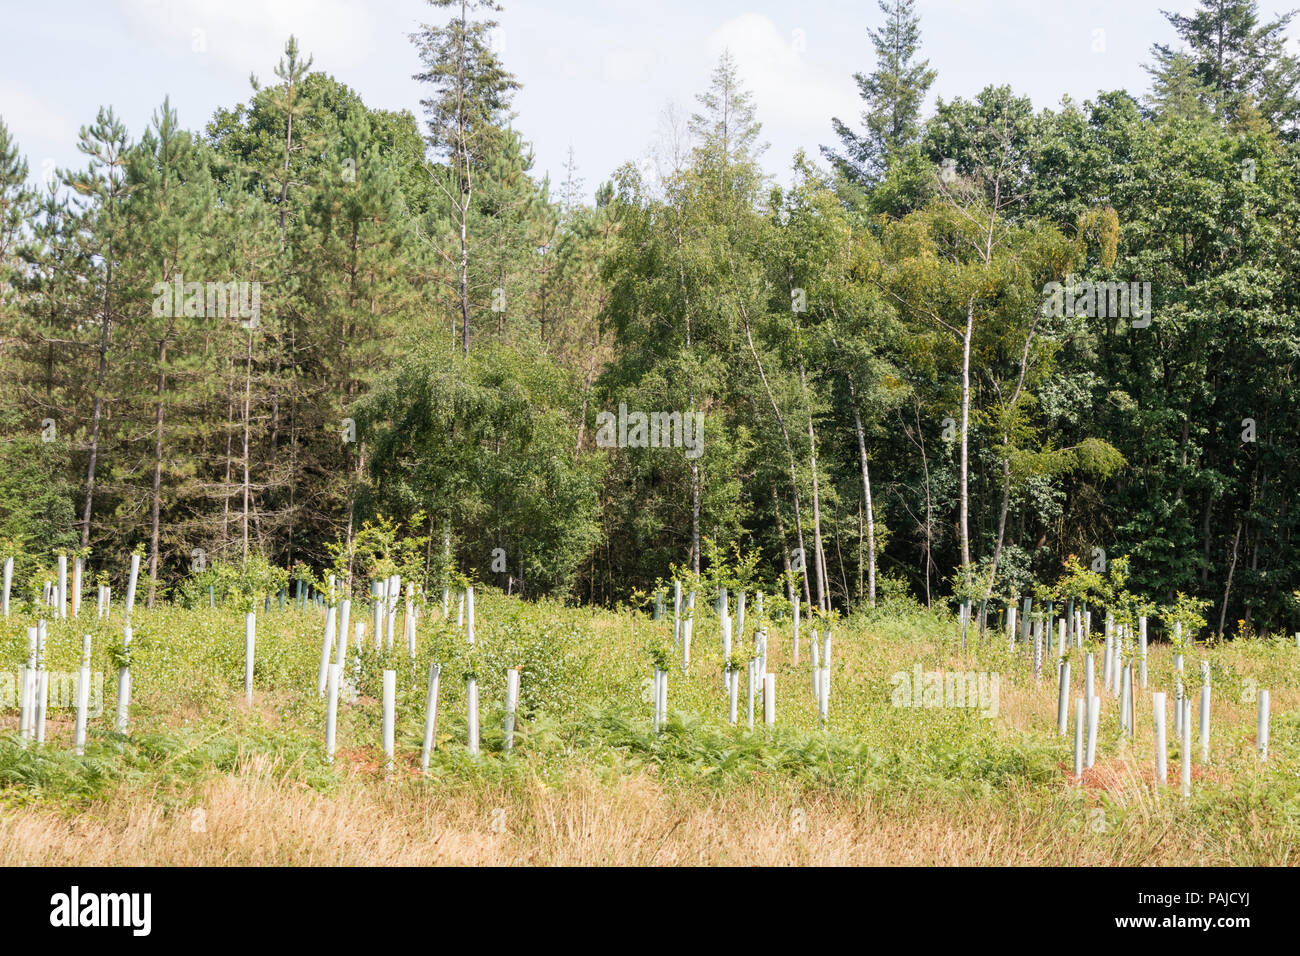 New tree planting in a British forest, Britain, UK Stock Photo